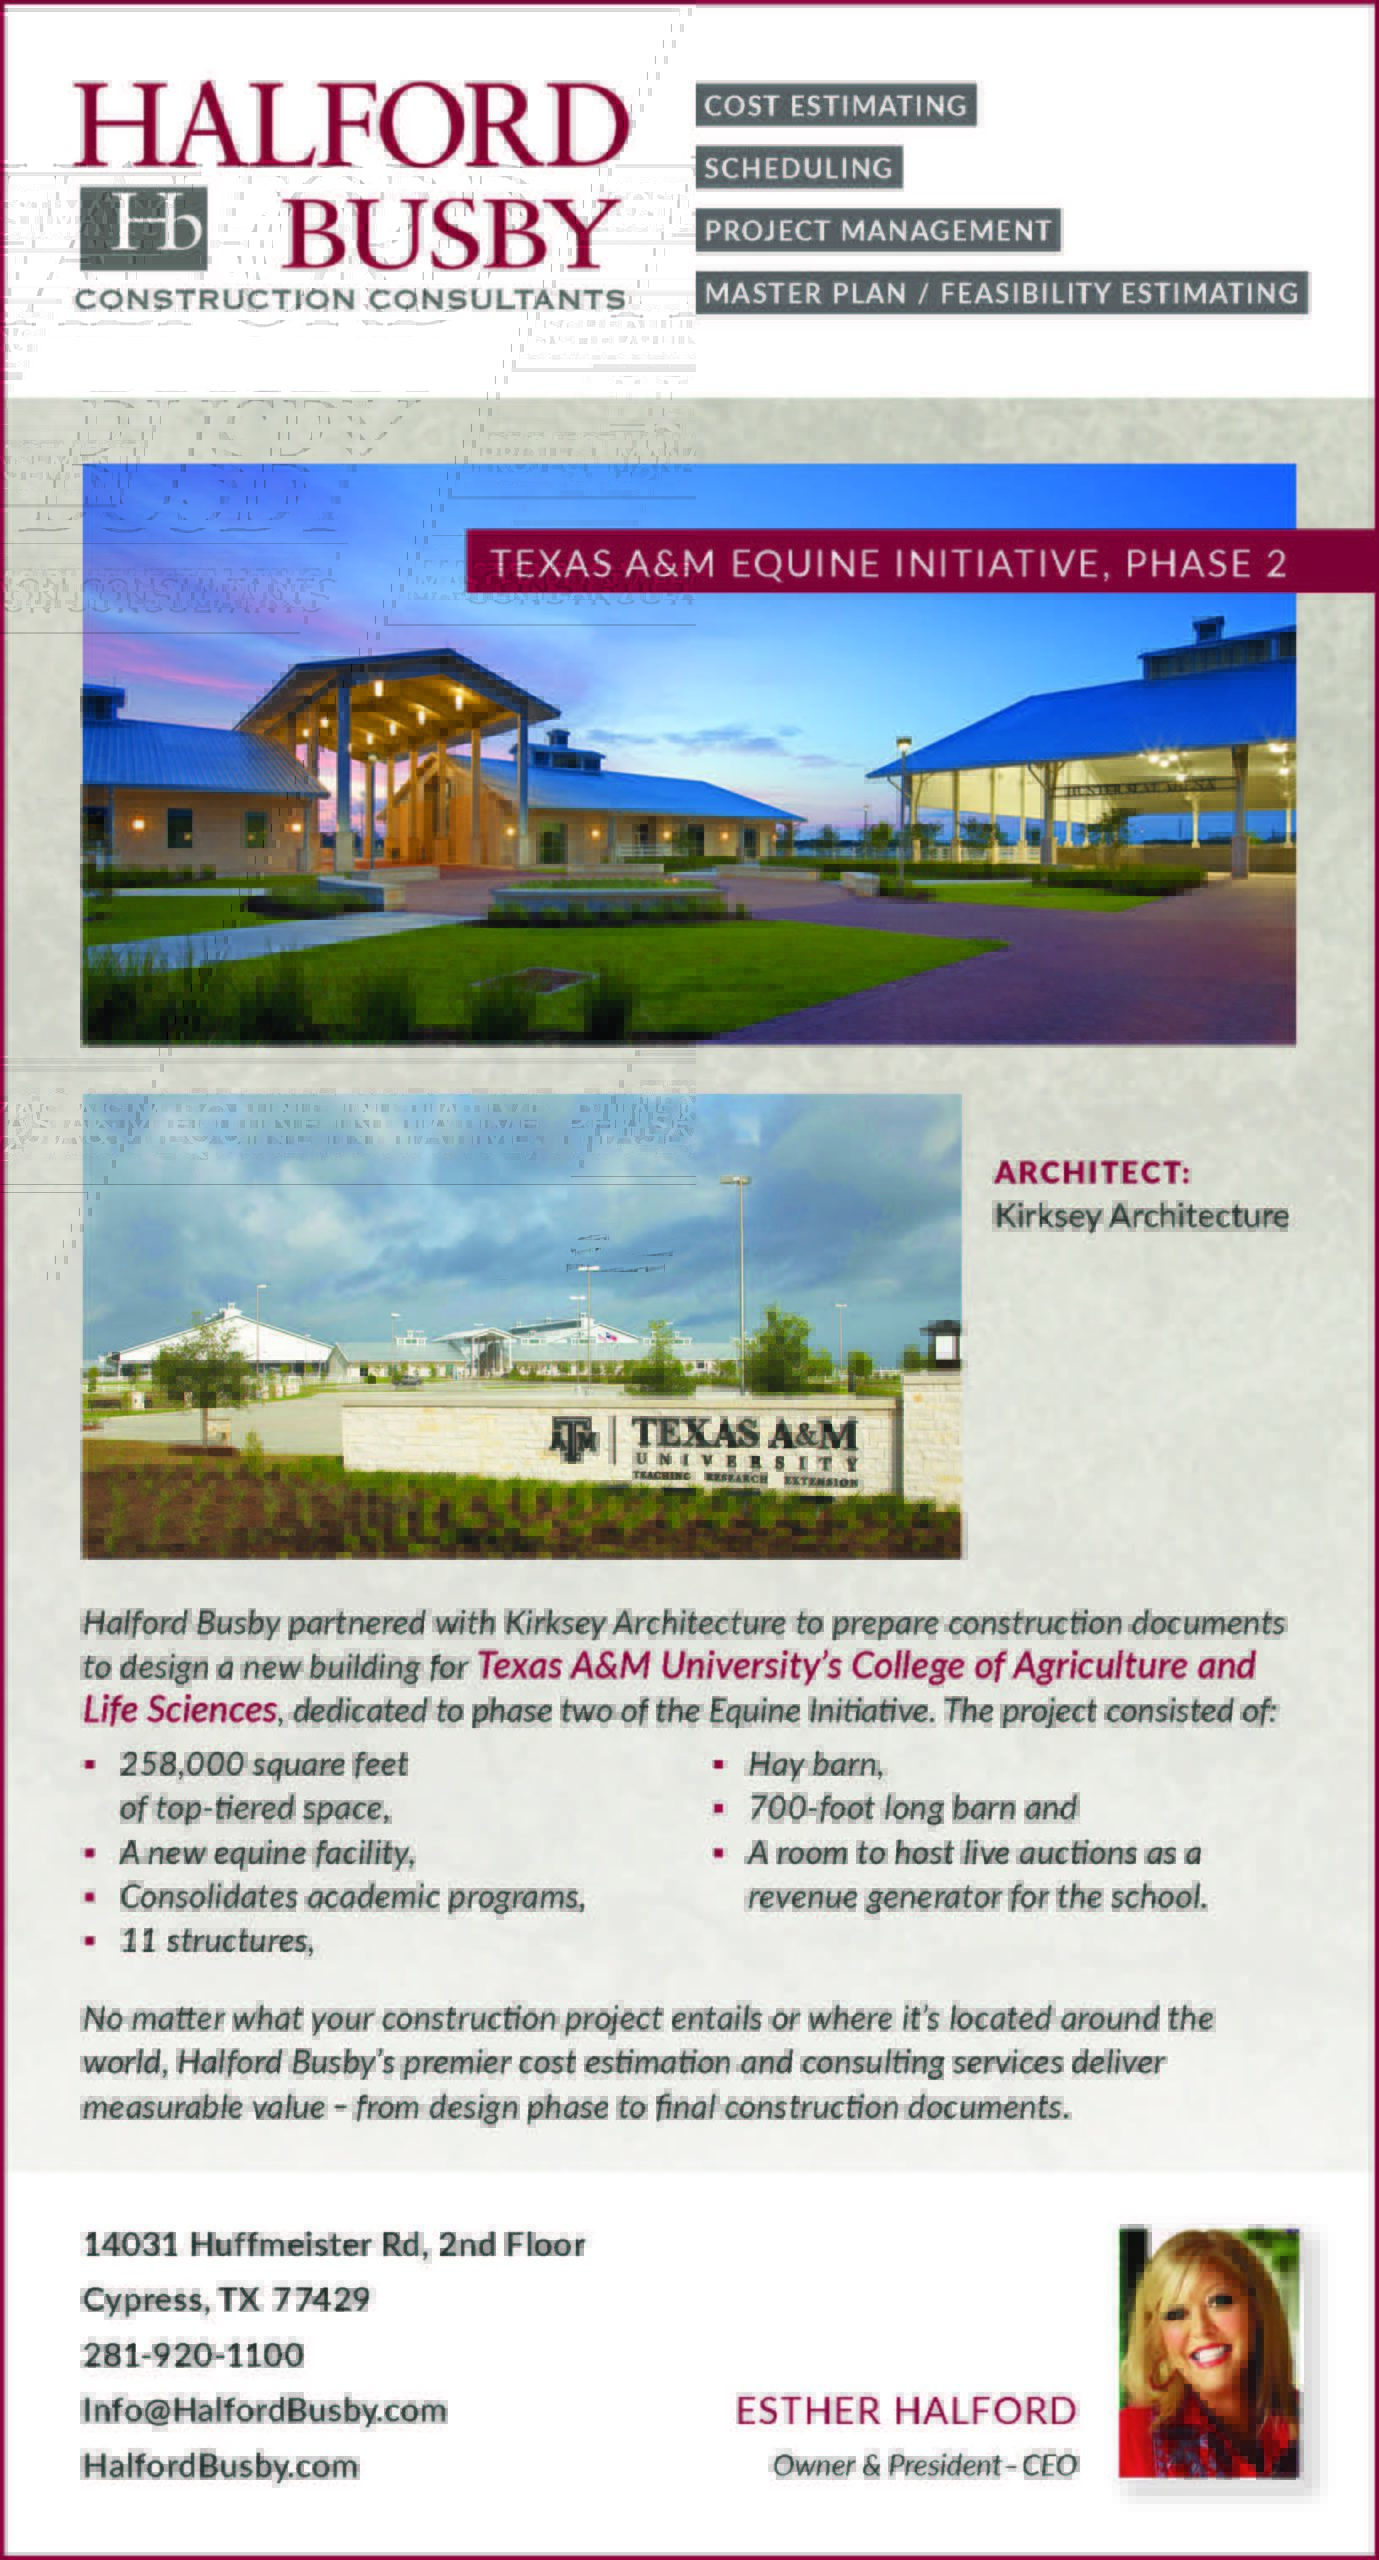 Halford Busby ad that ran in Texas Architect magazine in November/December 2020